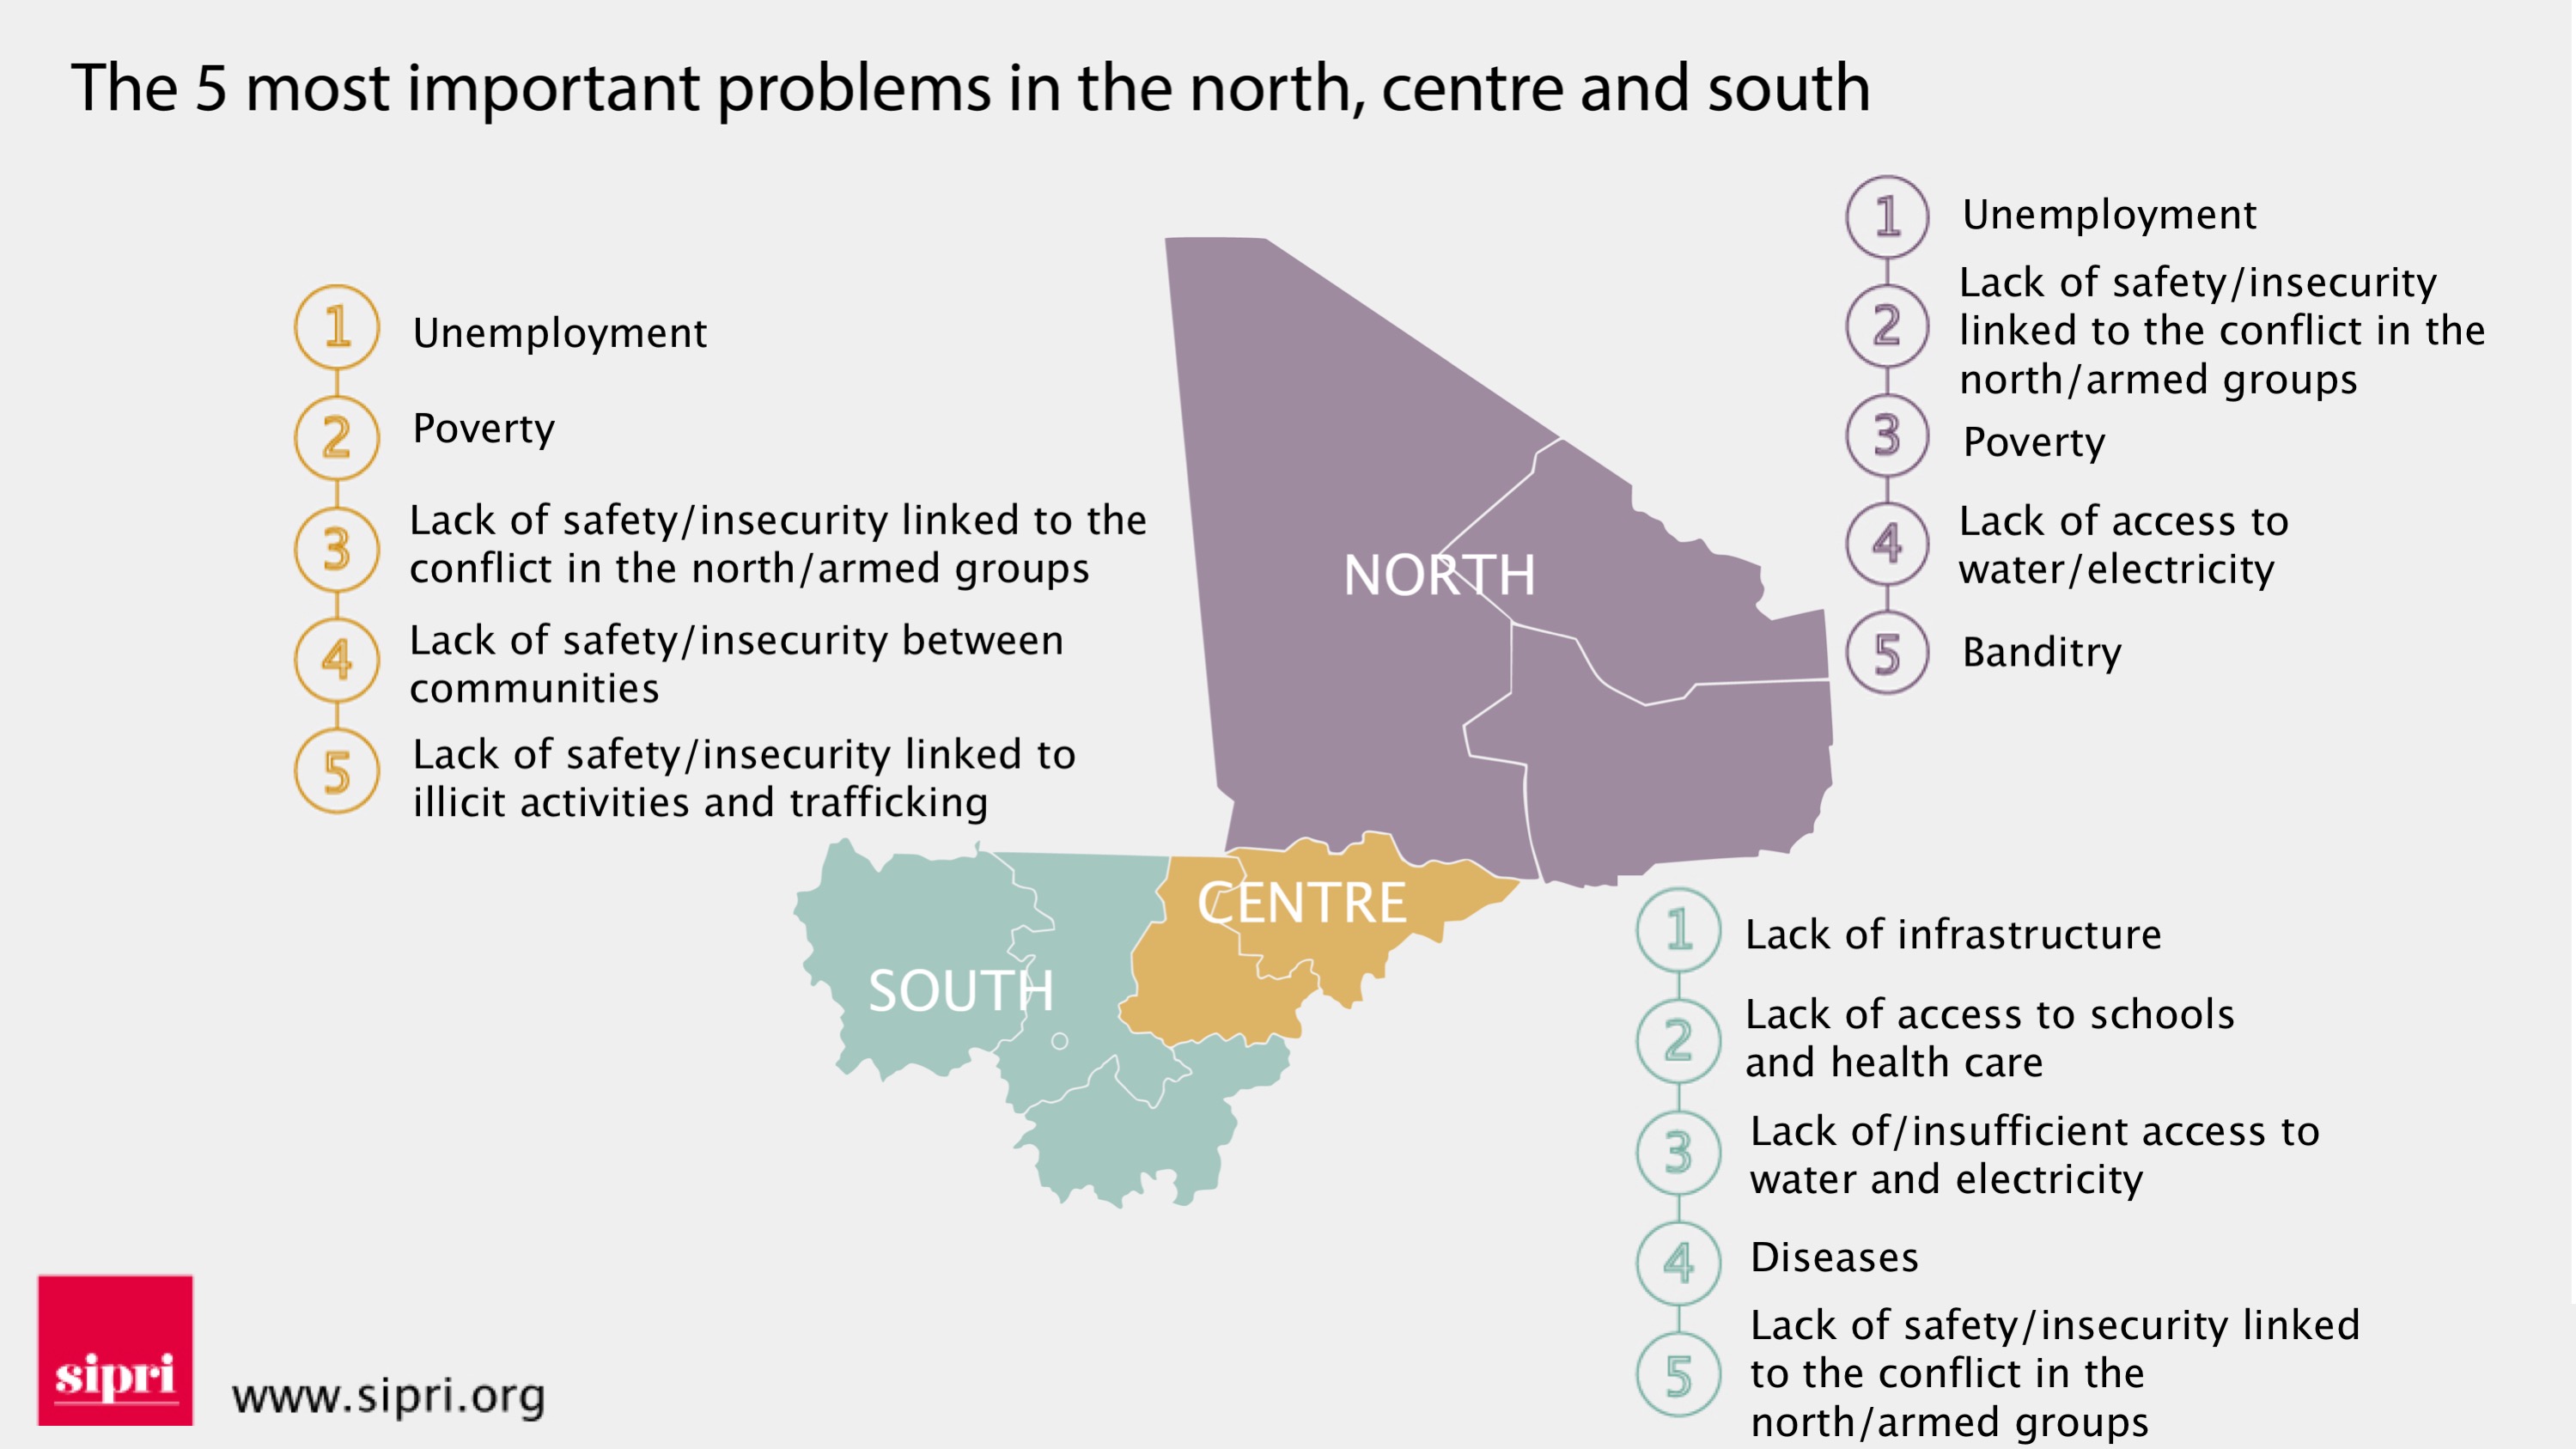 The 5 most important problems in the north, centre and south